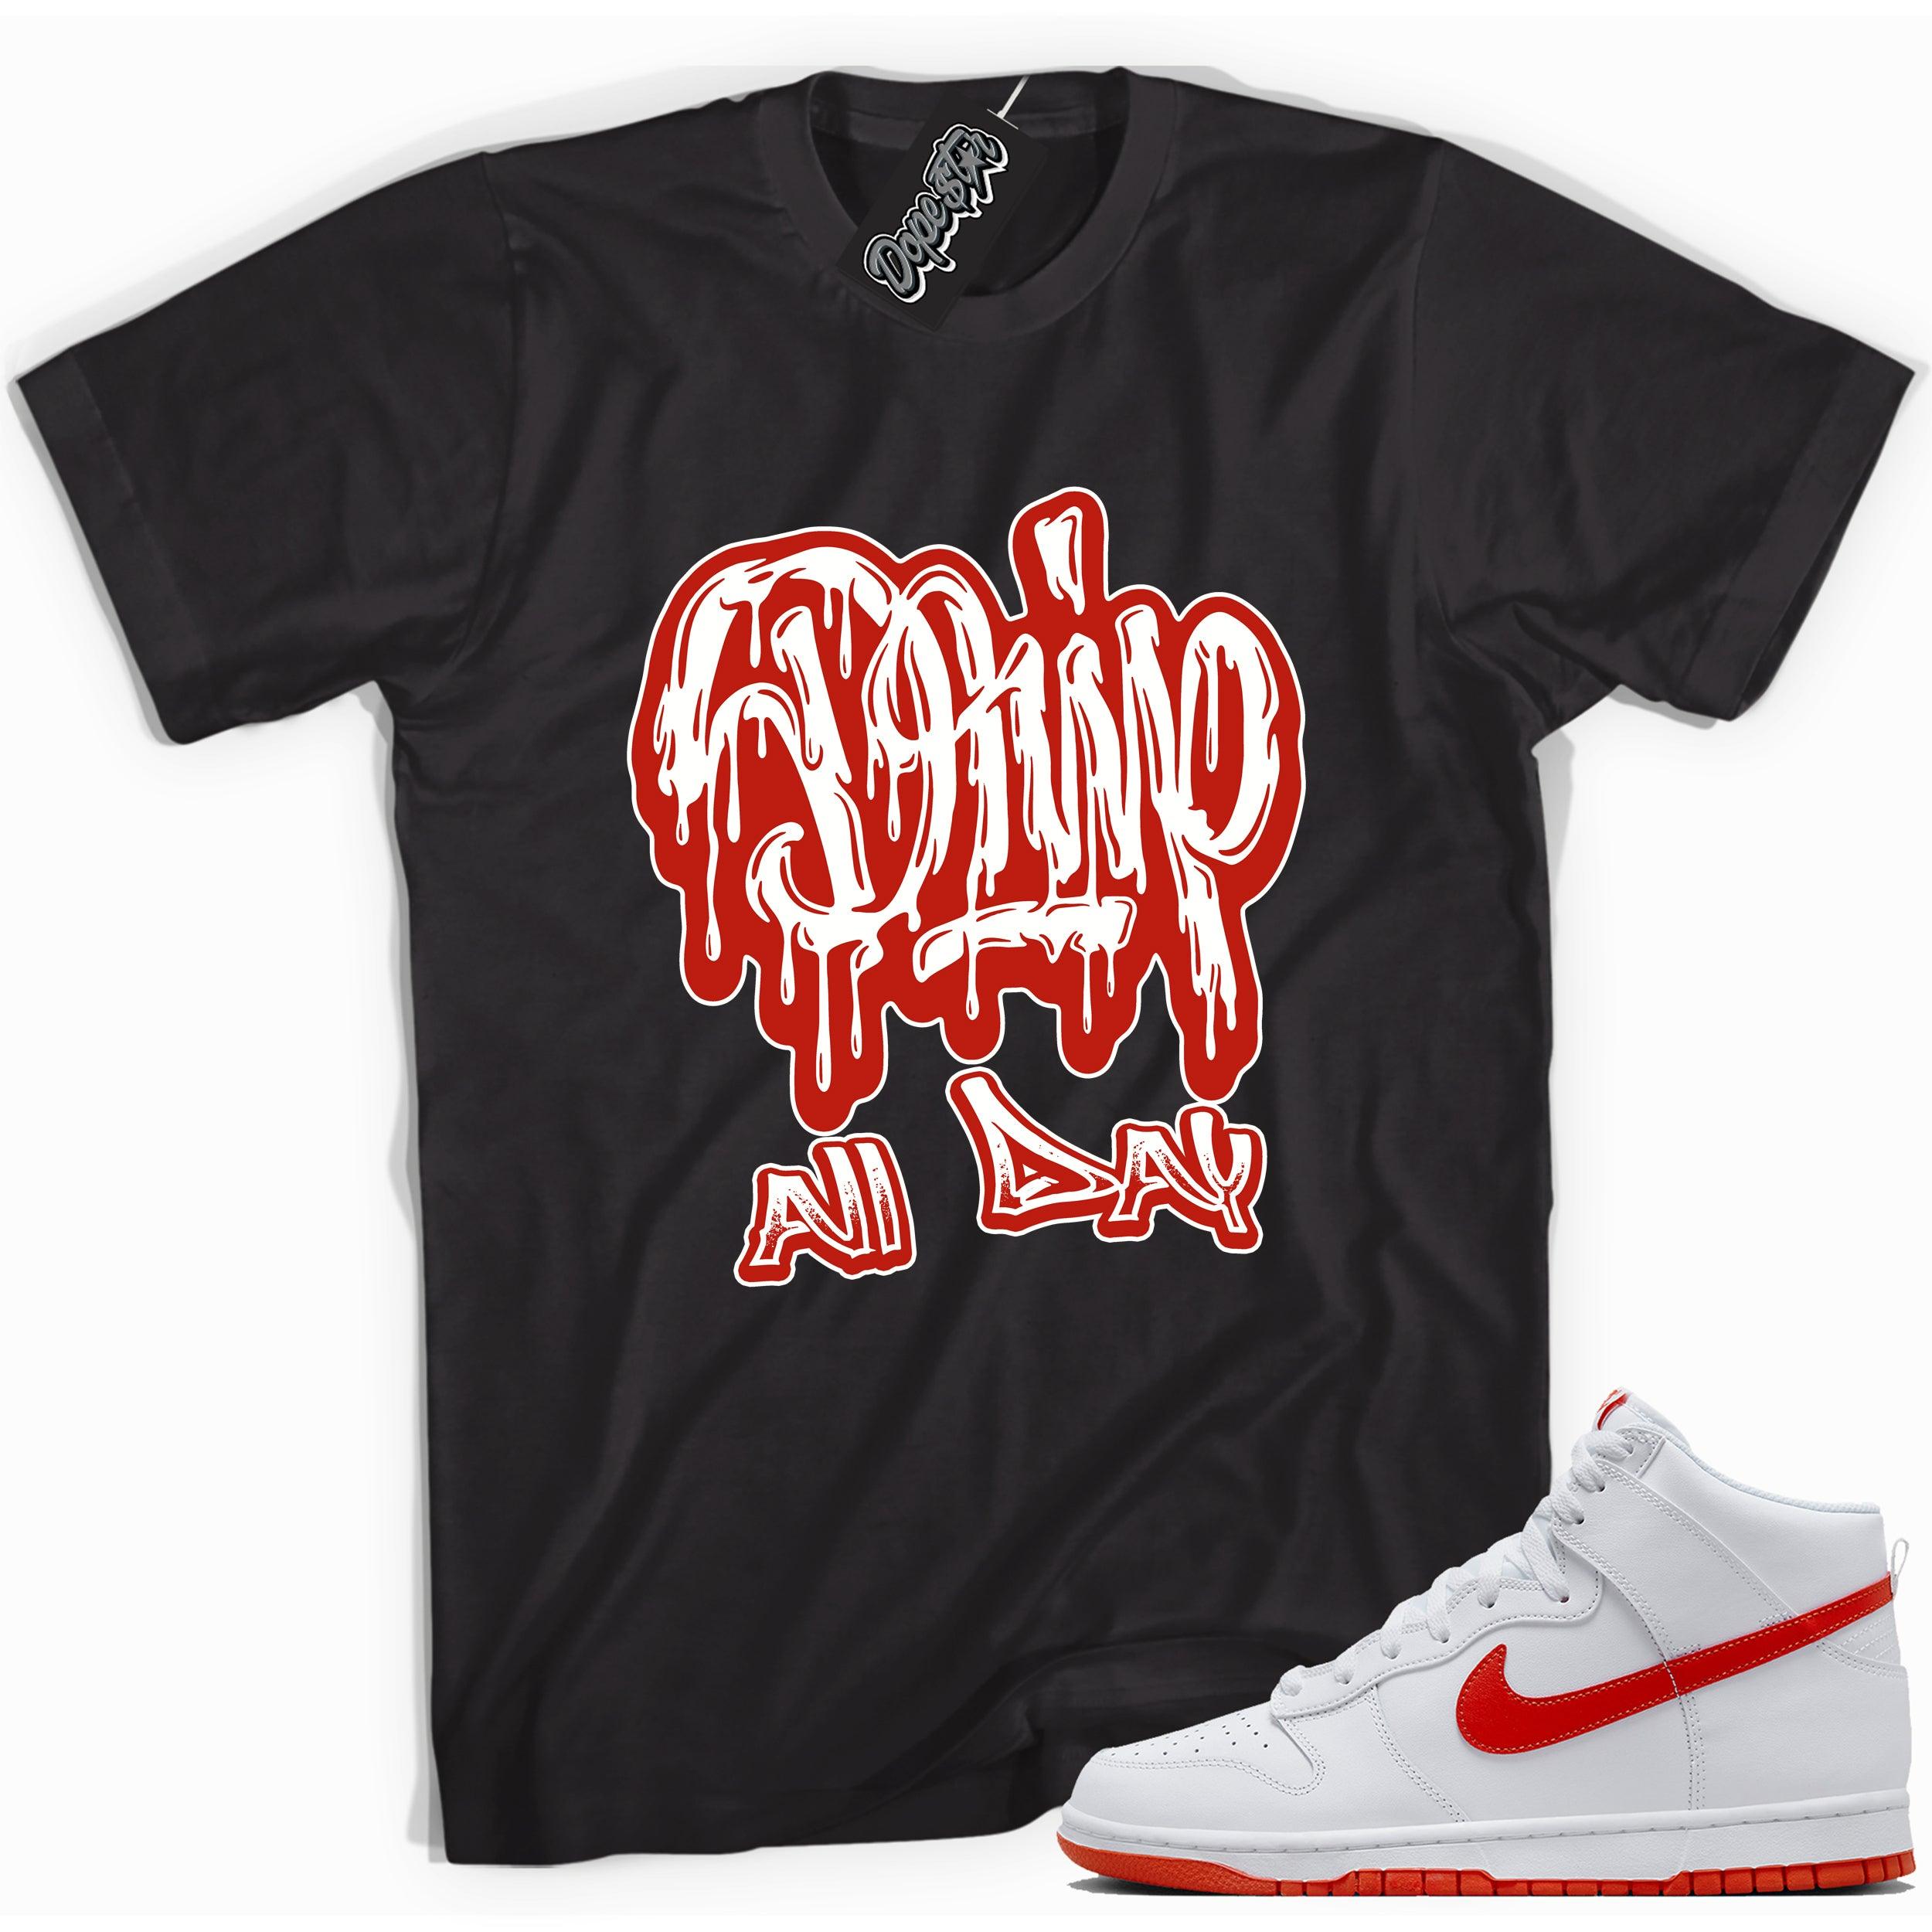 Cool black graphic tee with 'drip all day' print, that perfectly matches Nike Dunk High White Picante Red sneakers.